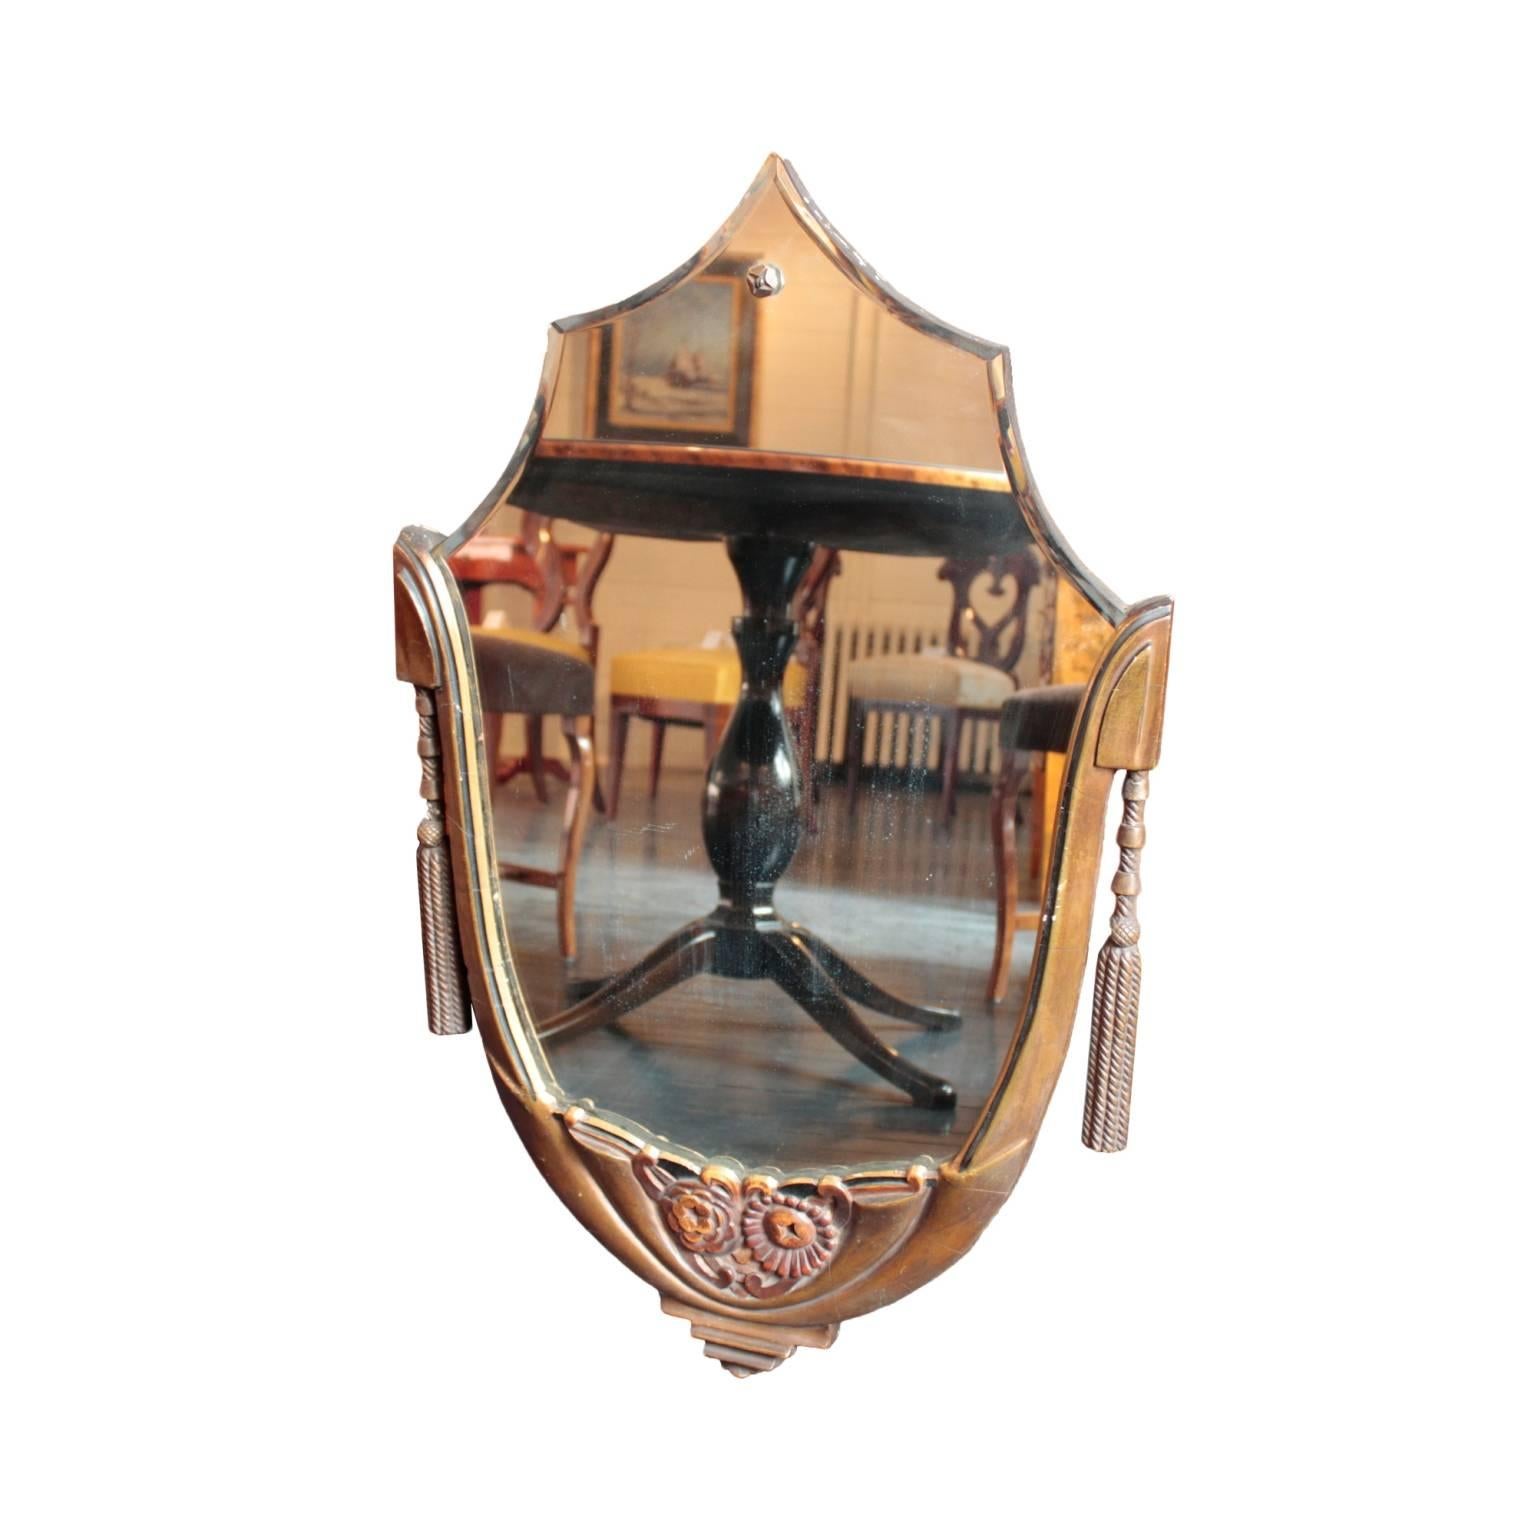 Lyre shaped, bronze color painted and parcel ebonized wooden frame with finely carved tassels, scroll and floral motifs featuring a bud and a bloomed flower. Shaped original beveled mirror plate with a decorative screw at the top.